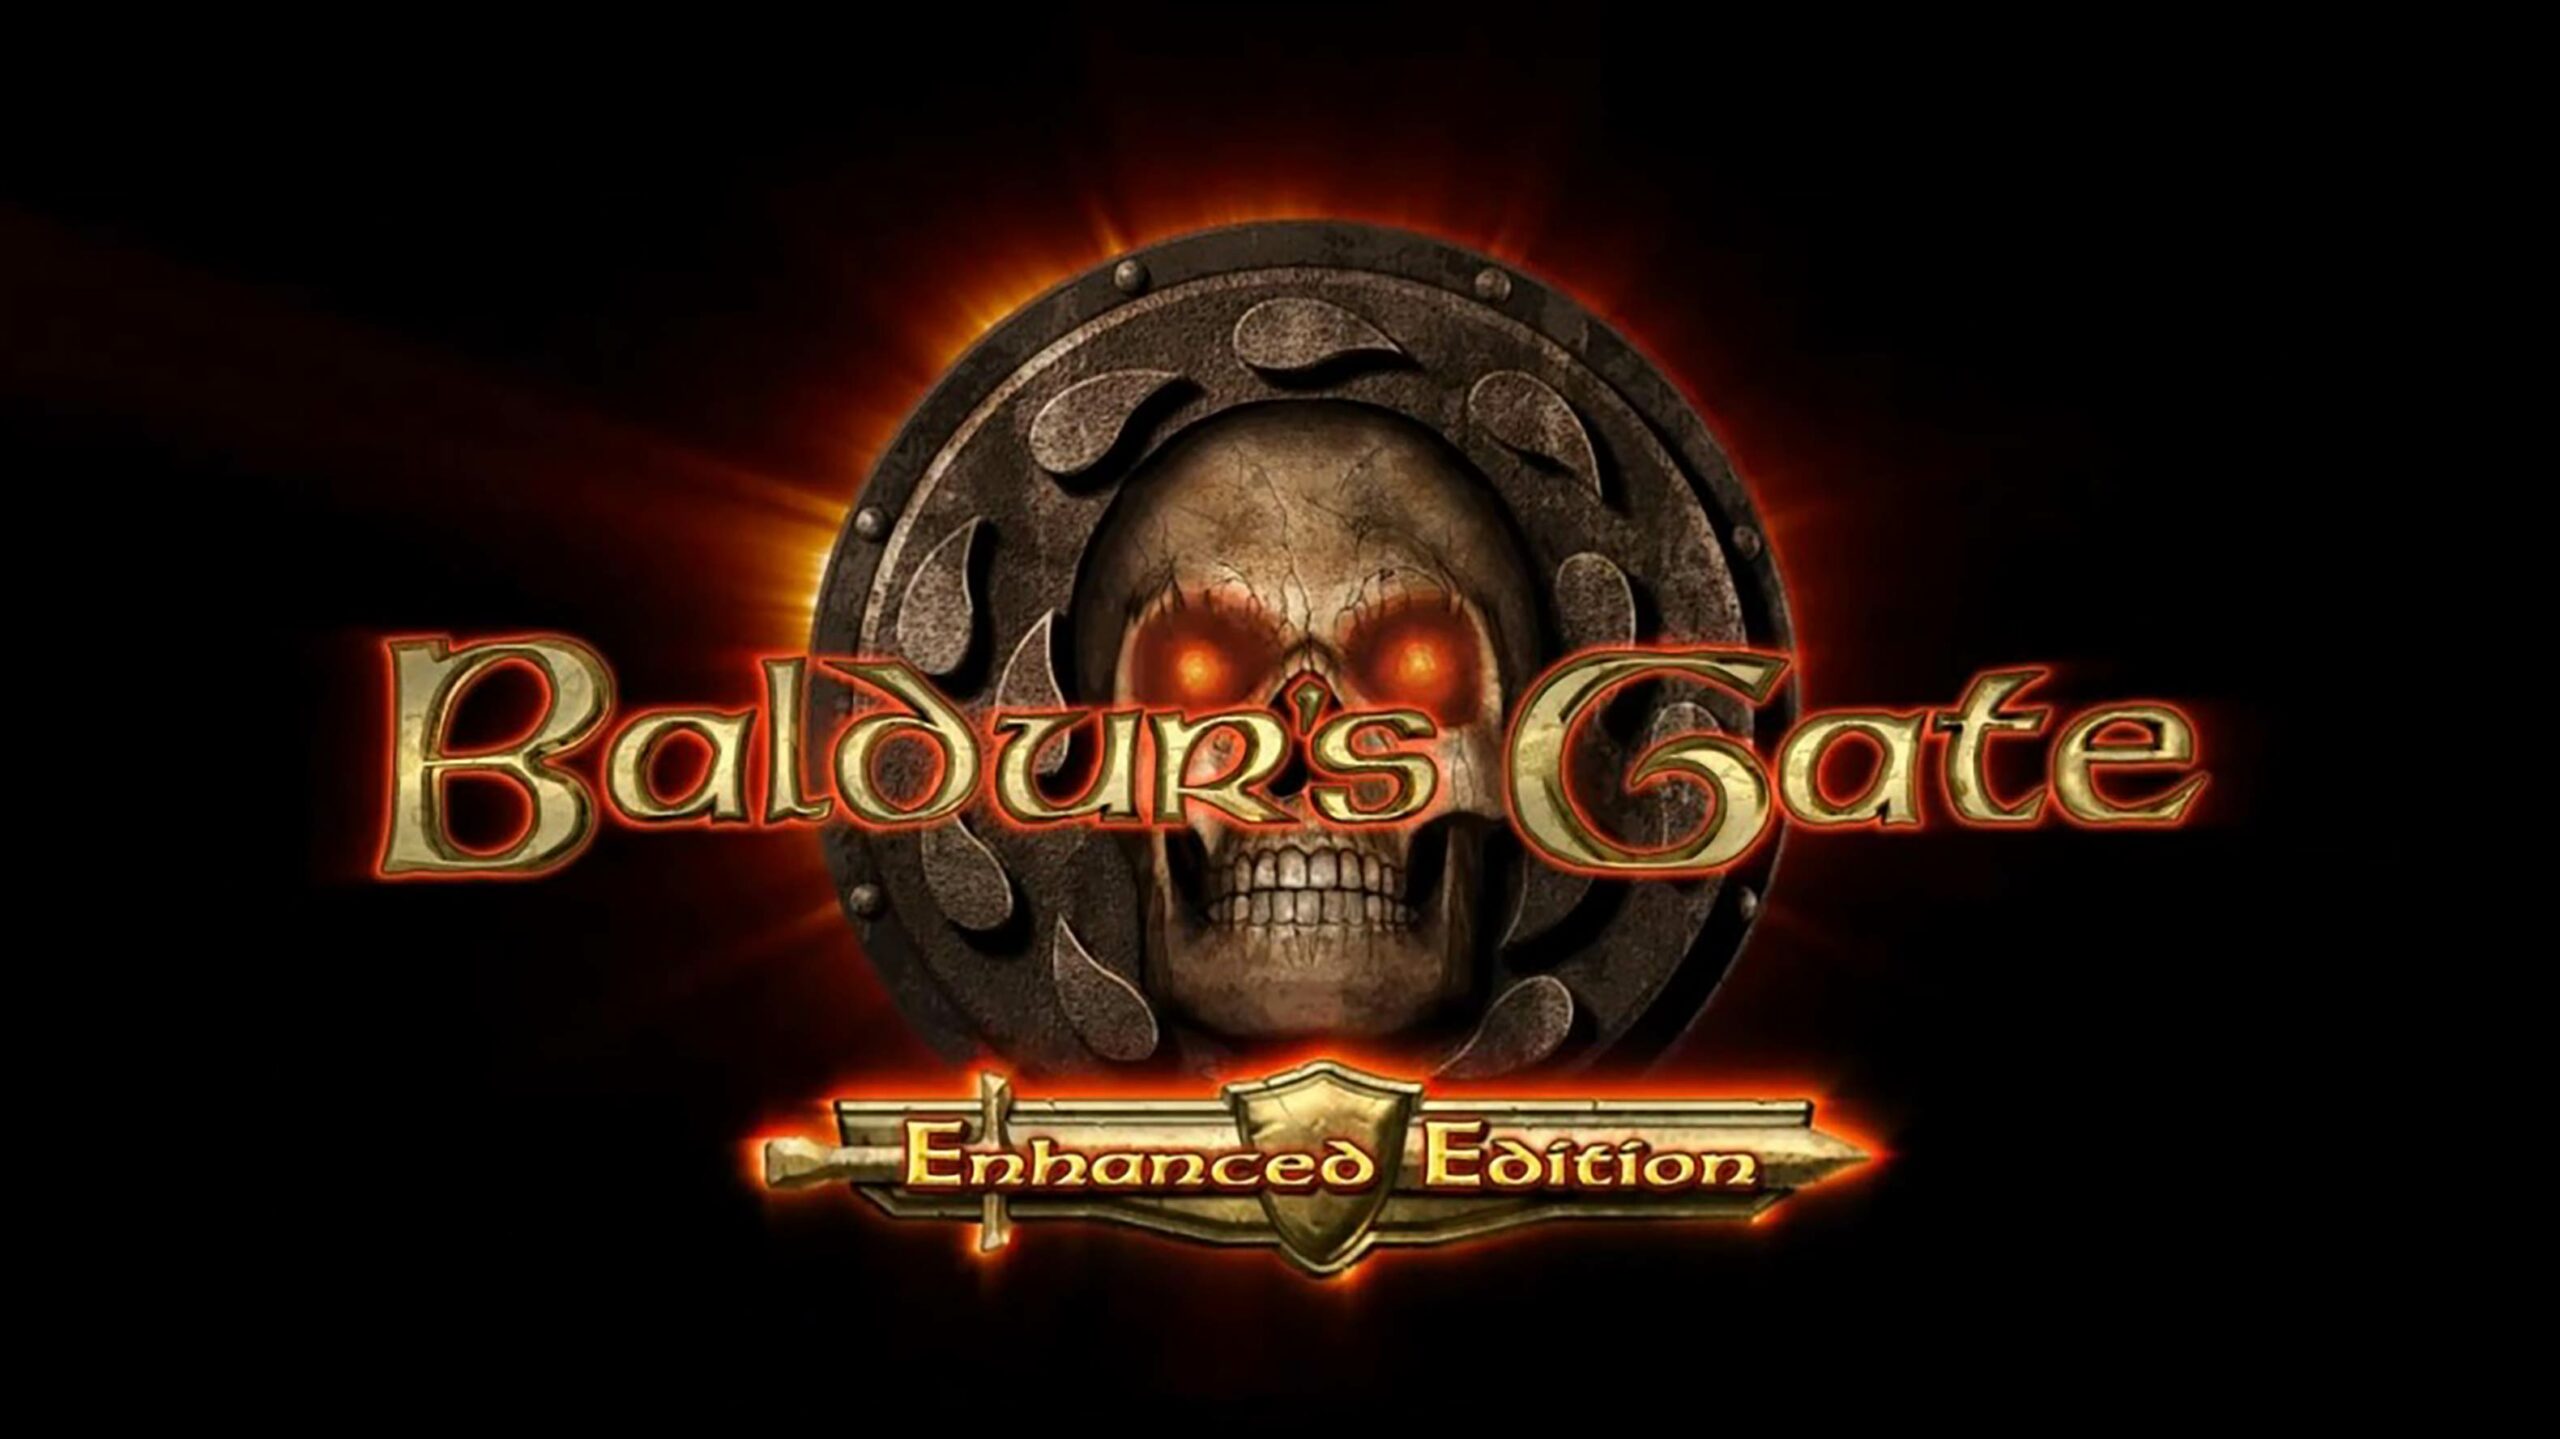 Prime Gaming March 2023 free games include Baldur's Gate